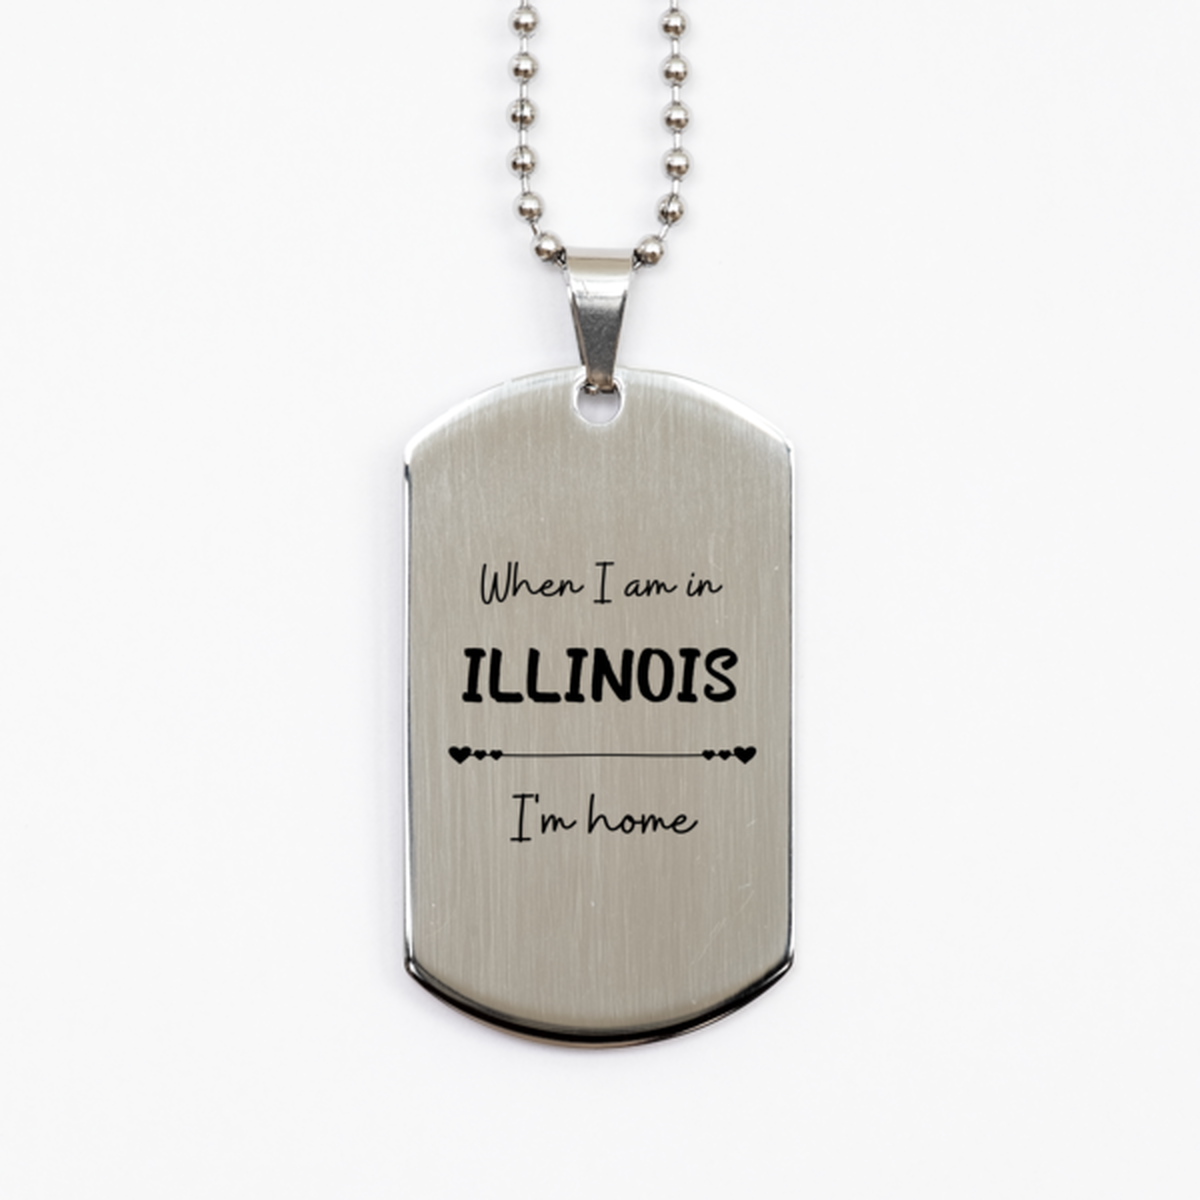 When I am in Illinois I'm home Silver Dog Tag, Cheap Gifts For Illinois, State Illinois Birthday Gifts for Friends Coworker